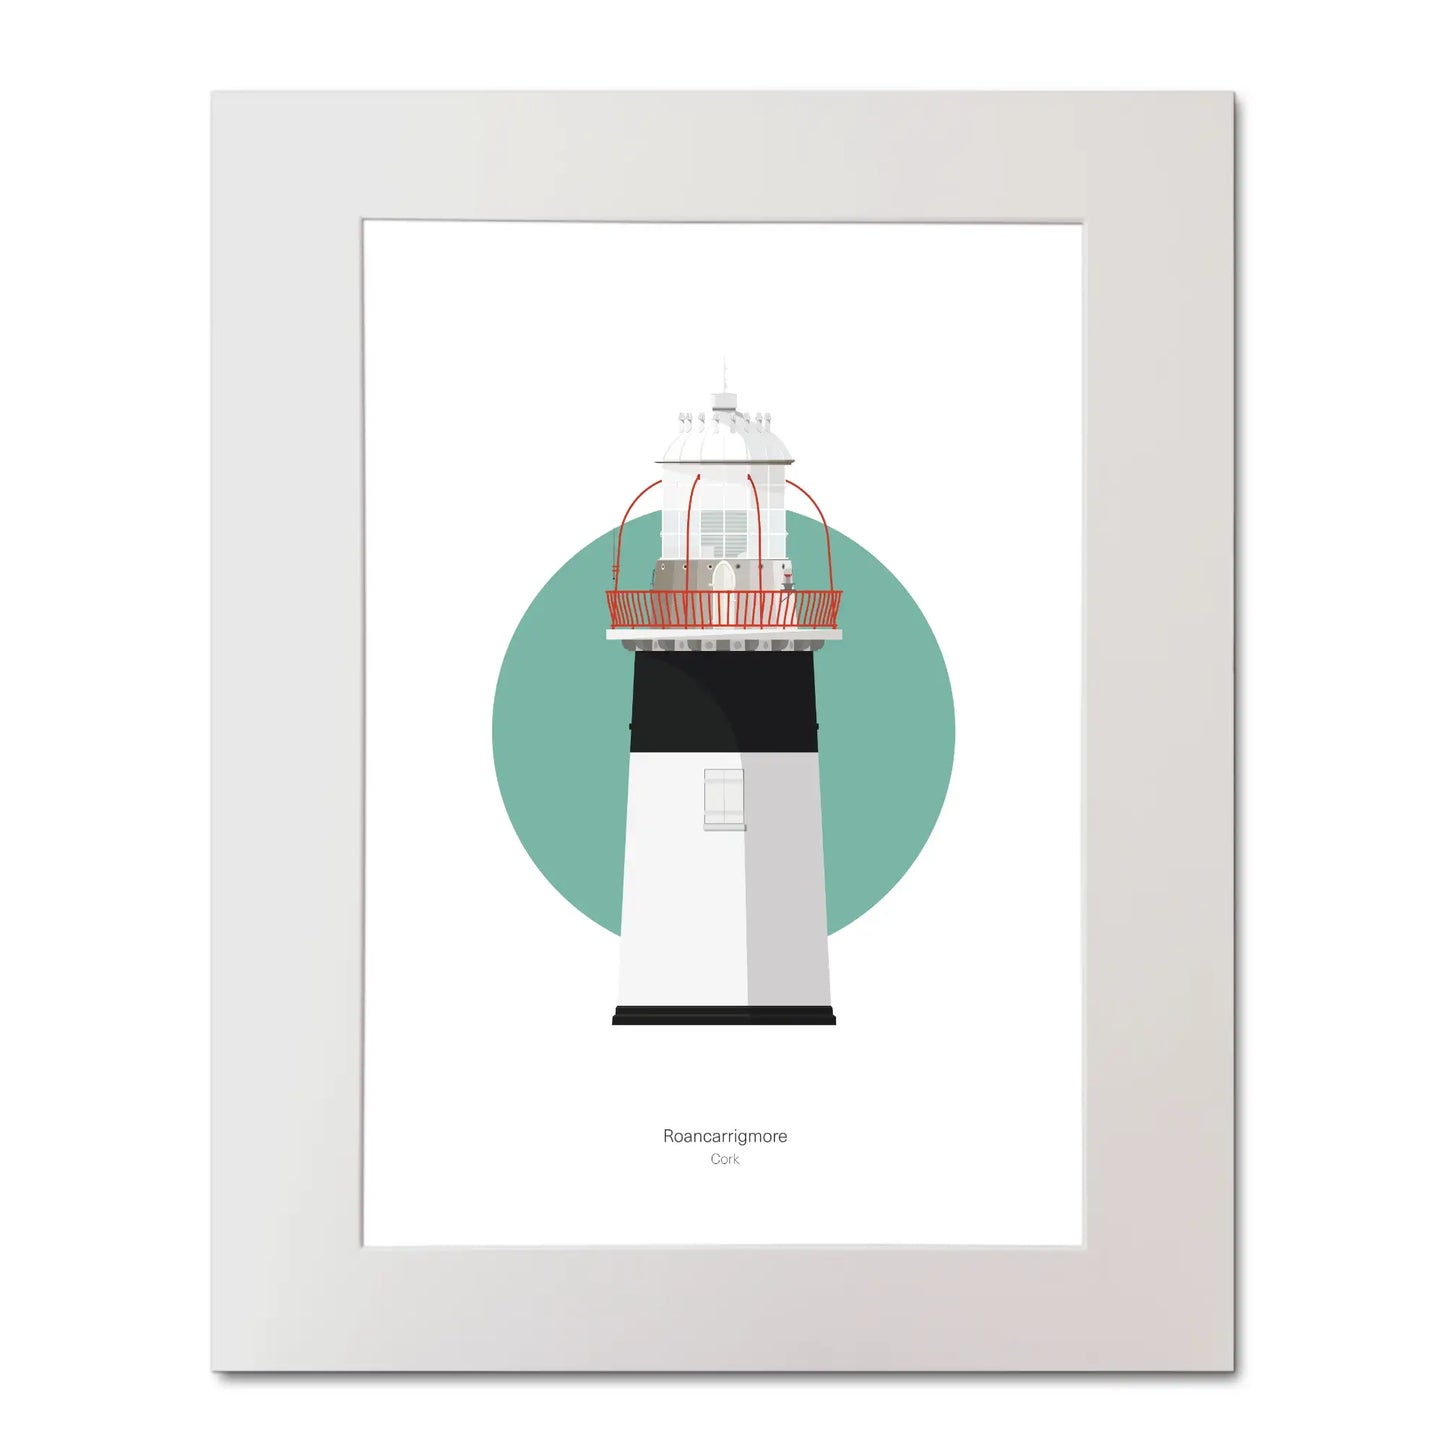 Illustration of Roancarrigmore lighthouse on a white background inside light blue square, mounted and measuring 40x50cm.